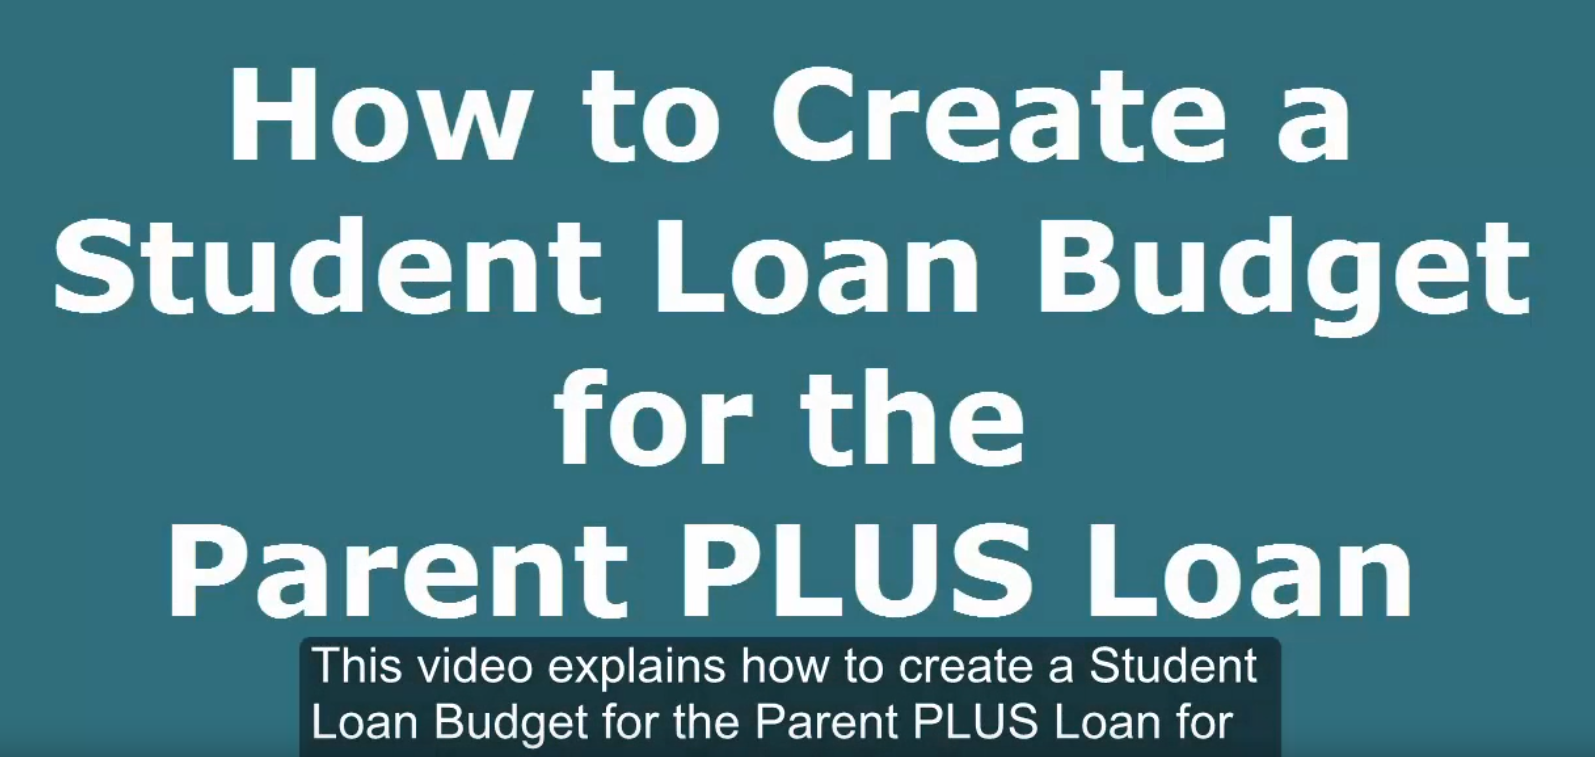 Opening screen of How to Create a Loan Budget Tutorial